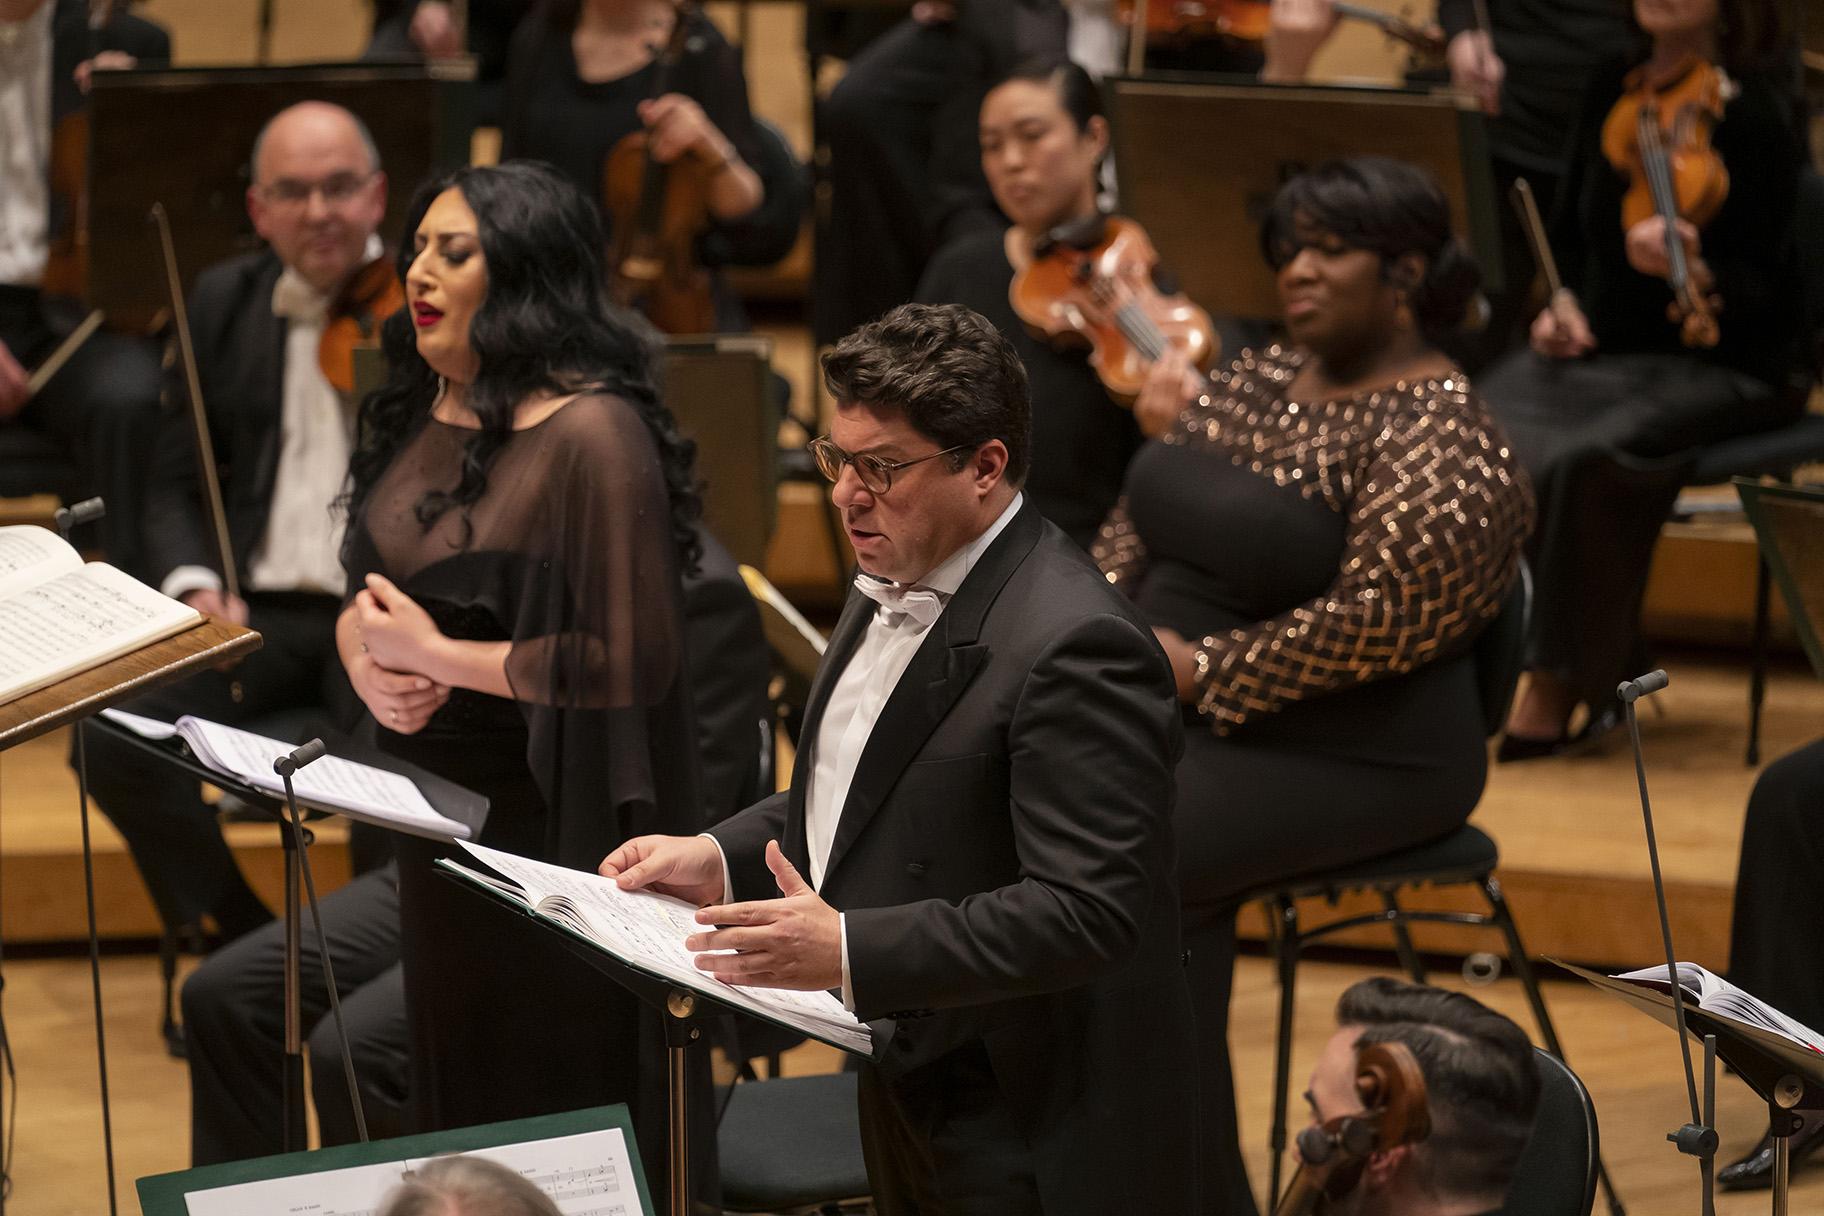 Baritone Luca Salsi, left, and mezzo-soprano Anita Rachvelishvili, right, perform the roles of Alfio and Santuzza respectively in the Chicago Symphony Orchestra’s concert performance of “Cavalleria rusticana” at Symphony Center on Feb. 6, 2020. (Credit: Todd Rosenberg)